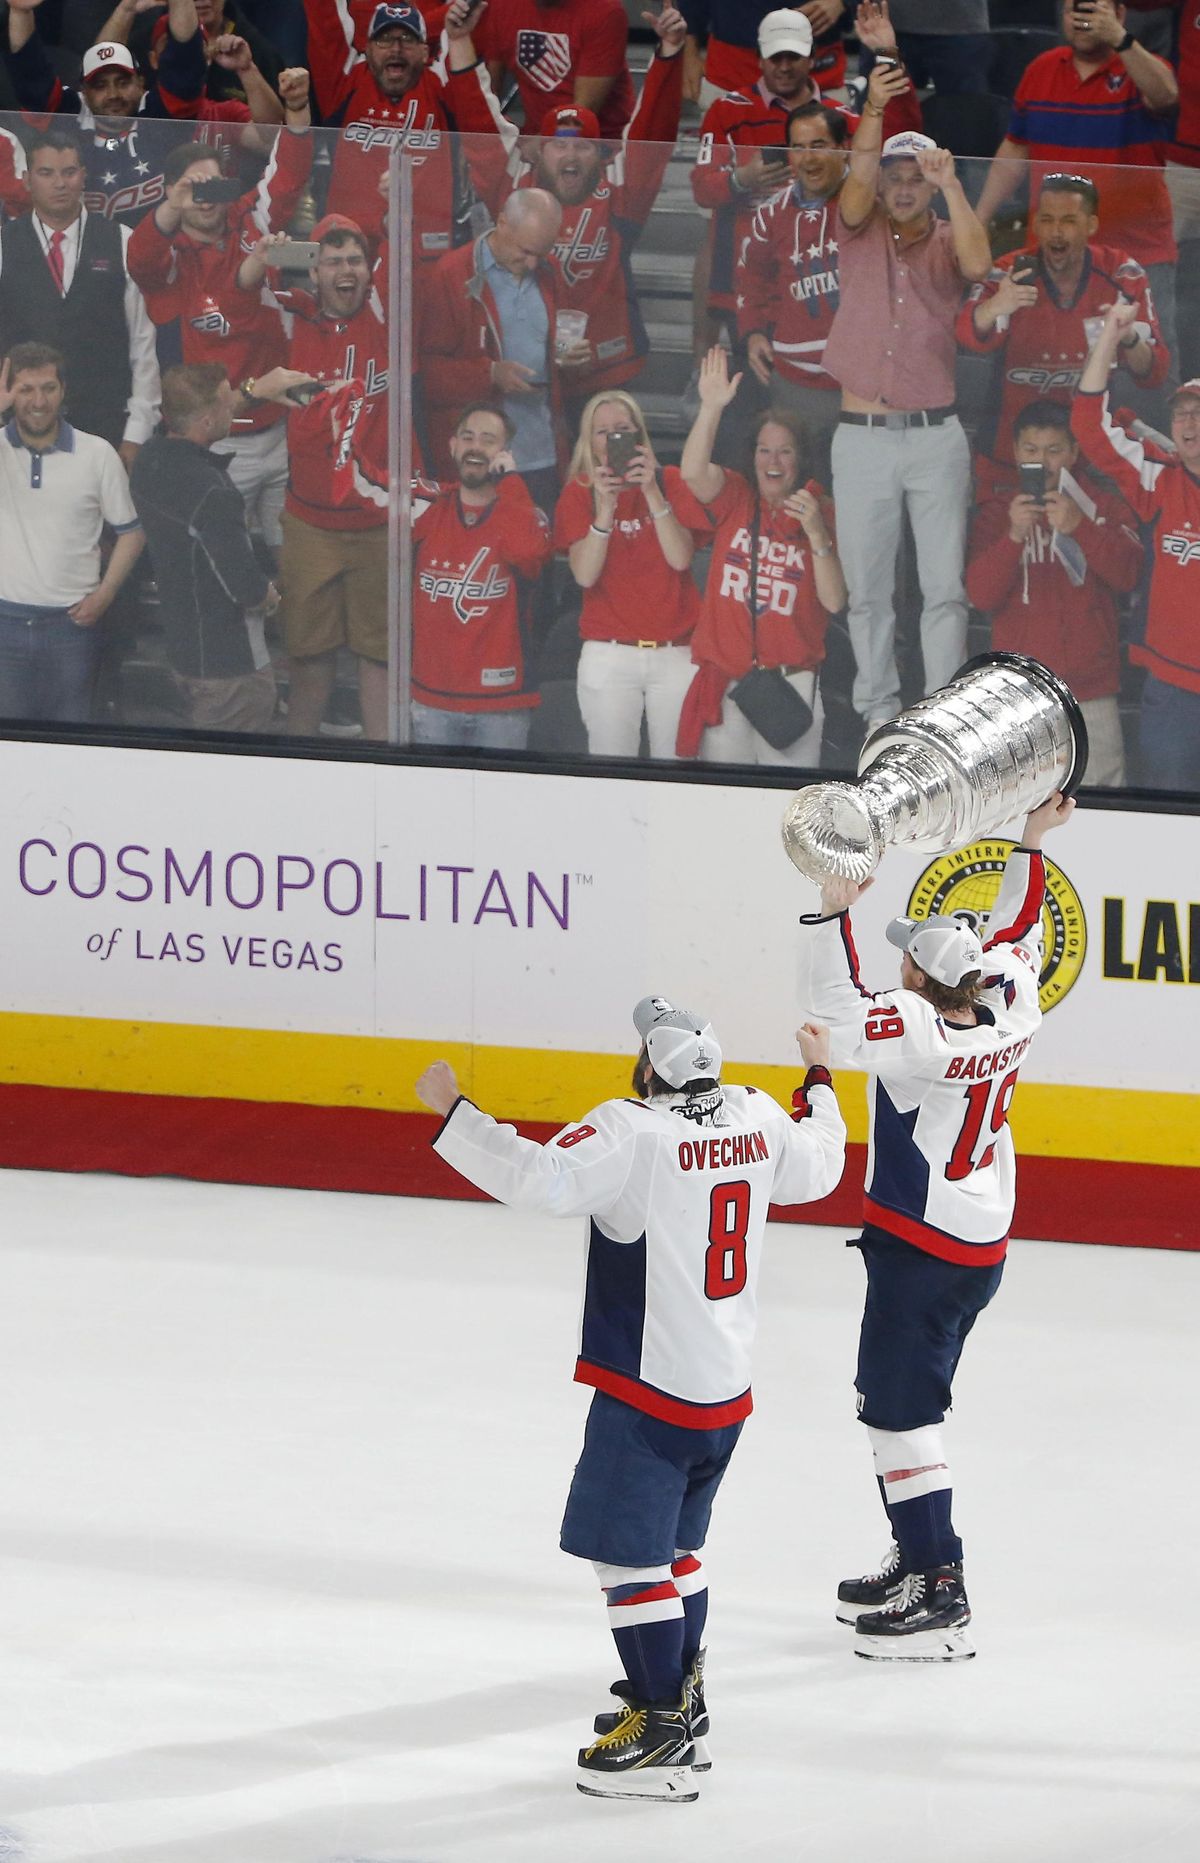 Washington Capitals center Nicklas Backstrom, right, of Sweden, carries the Stanley Cup as he skates with left wing Alex Ovechkin, of Russia, after the Capitals defeated the Golden Knights 4-3 in Game 5 of the NHL hockey Stanley Cup Finals Thursday, June 7, 2018, in Las Vegas. (Ross D. Franklin / AP)